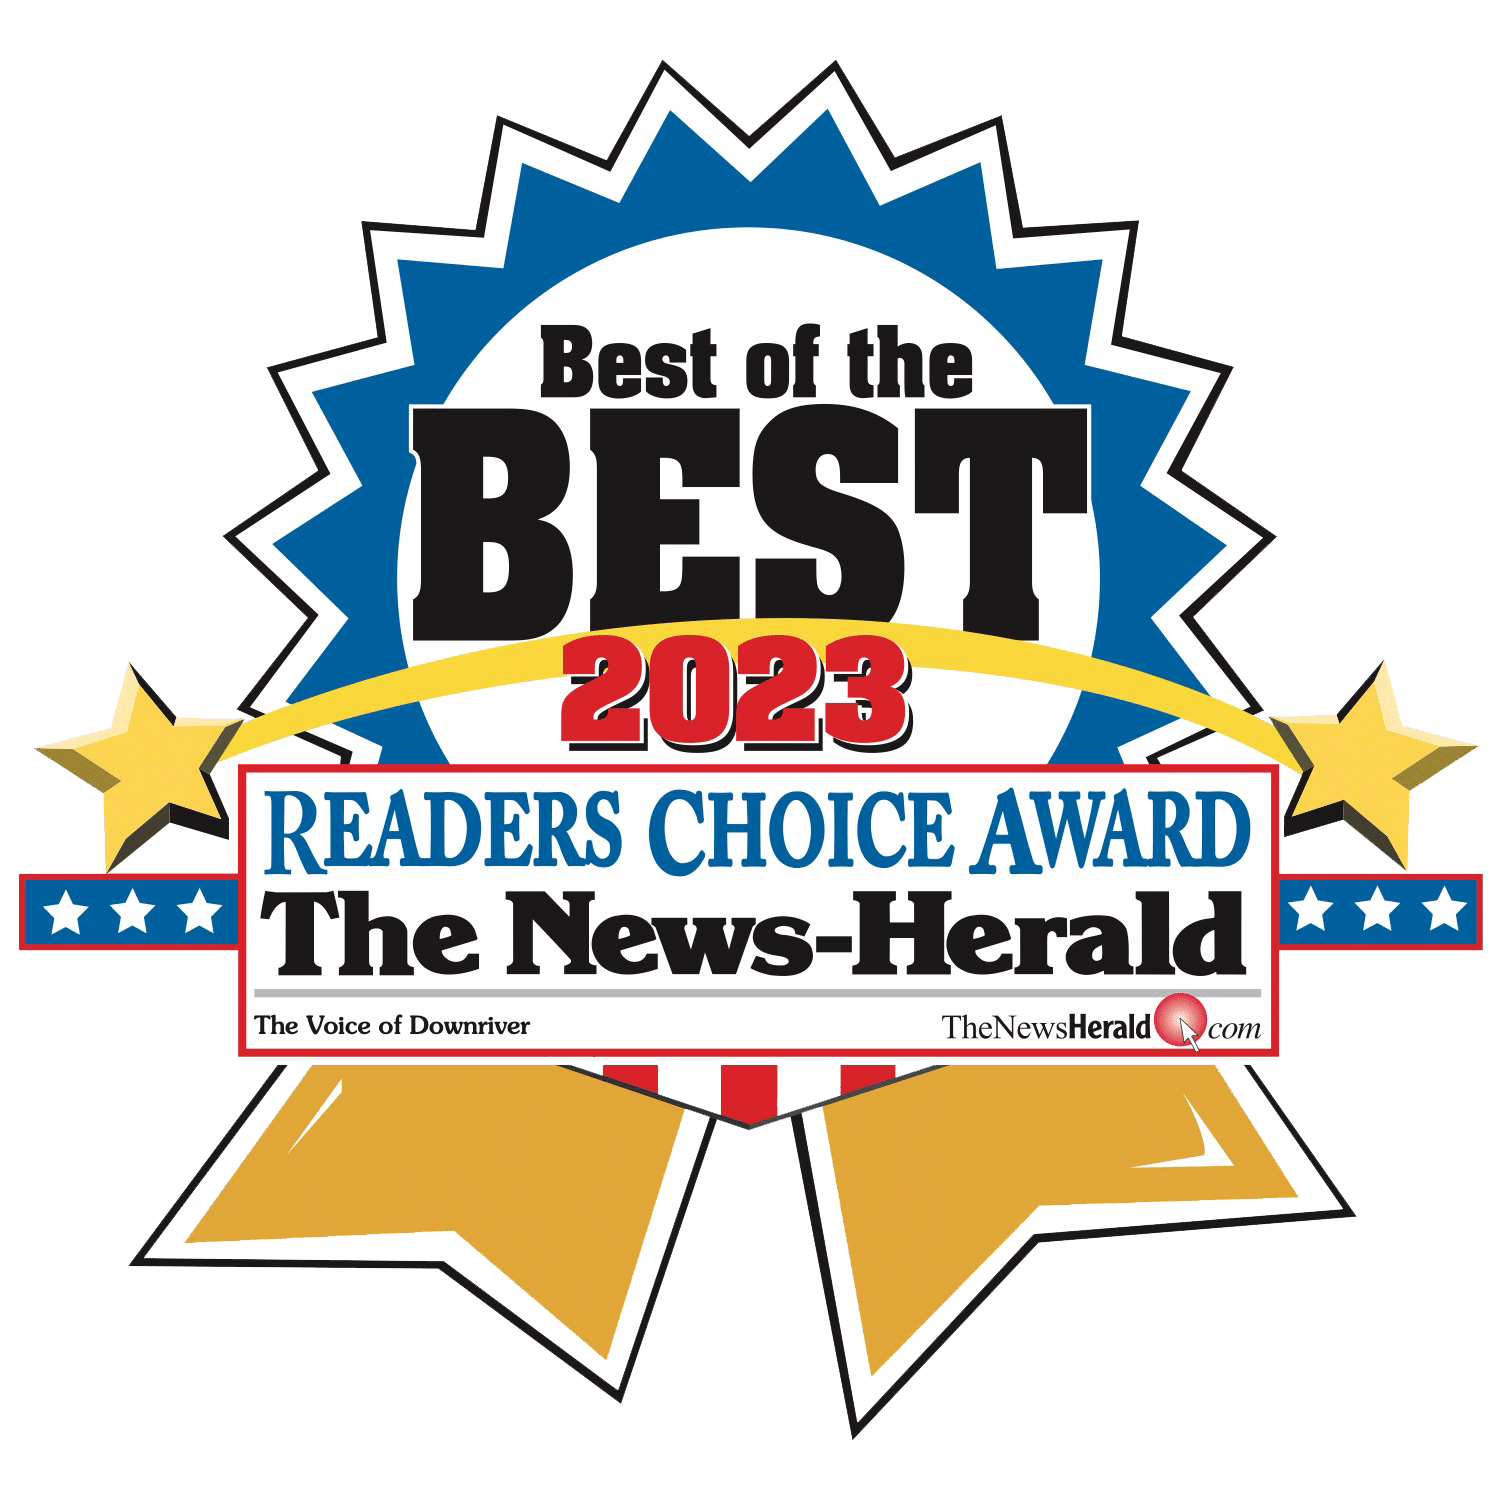 2023 Readers Choice Award The News-Herald Best of the Best